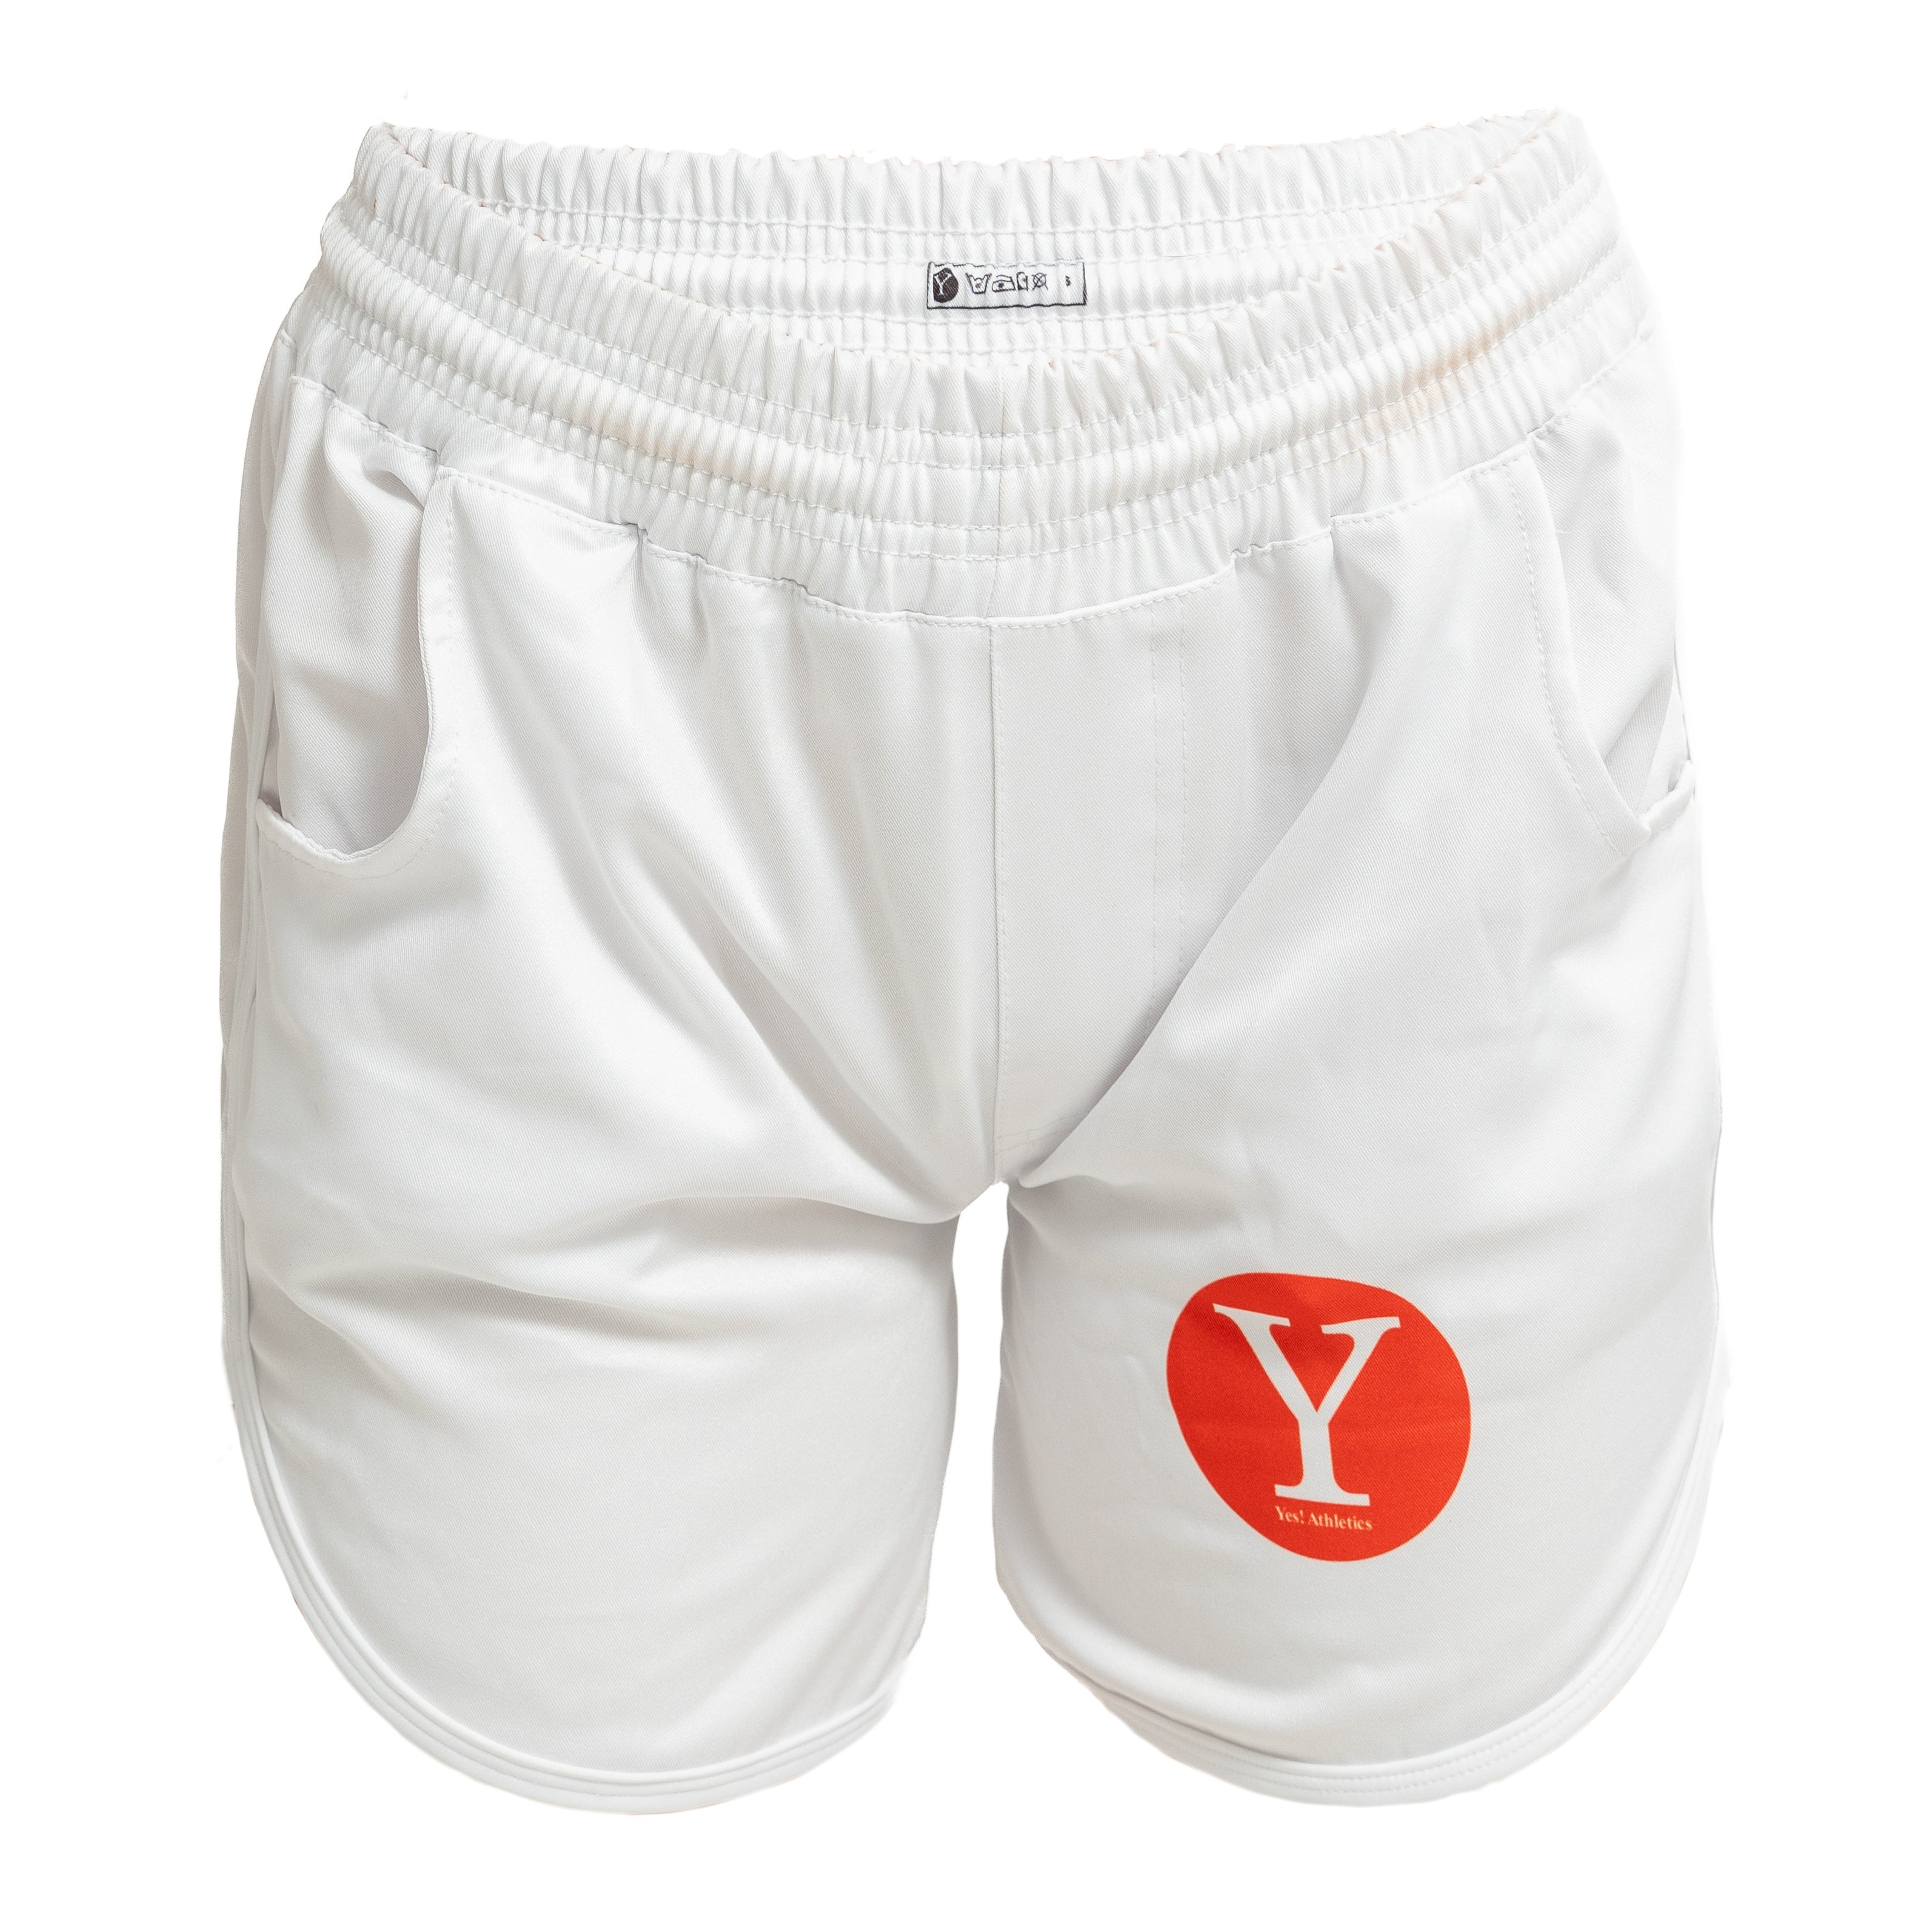 Yes! Athletics - Sport Shorts in Black and White Colors